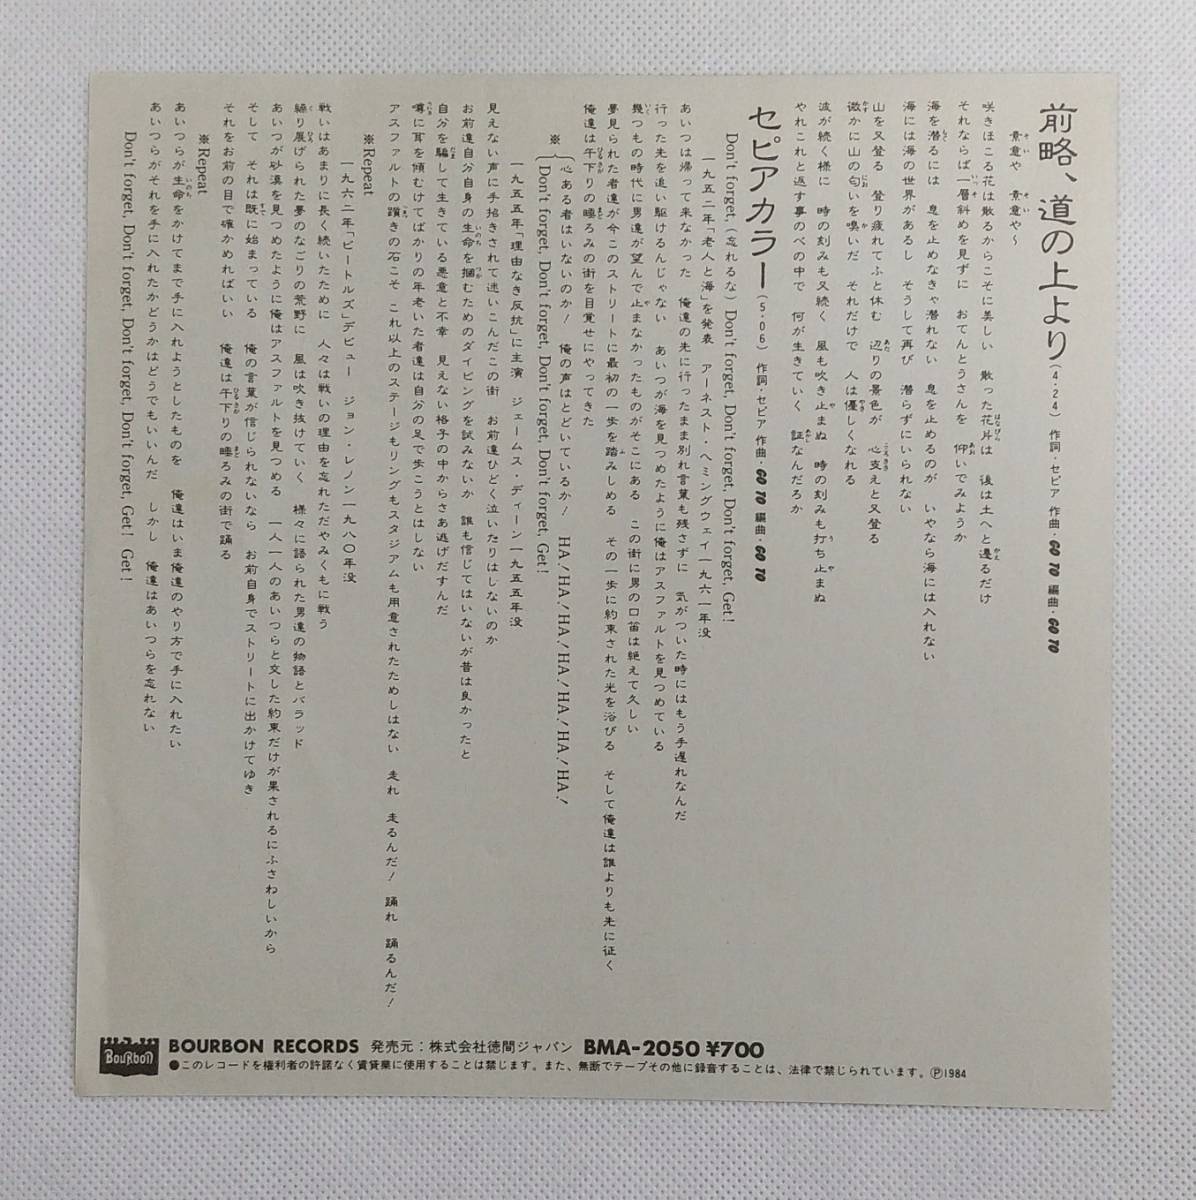 EP record / Isseifubi sepia / front ., road. on ../ sepia color /BMA-2050/mato number BMA-2050A,BMA-2050B/J-POP NE8